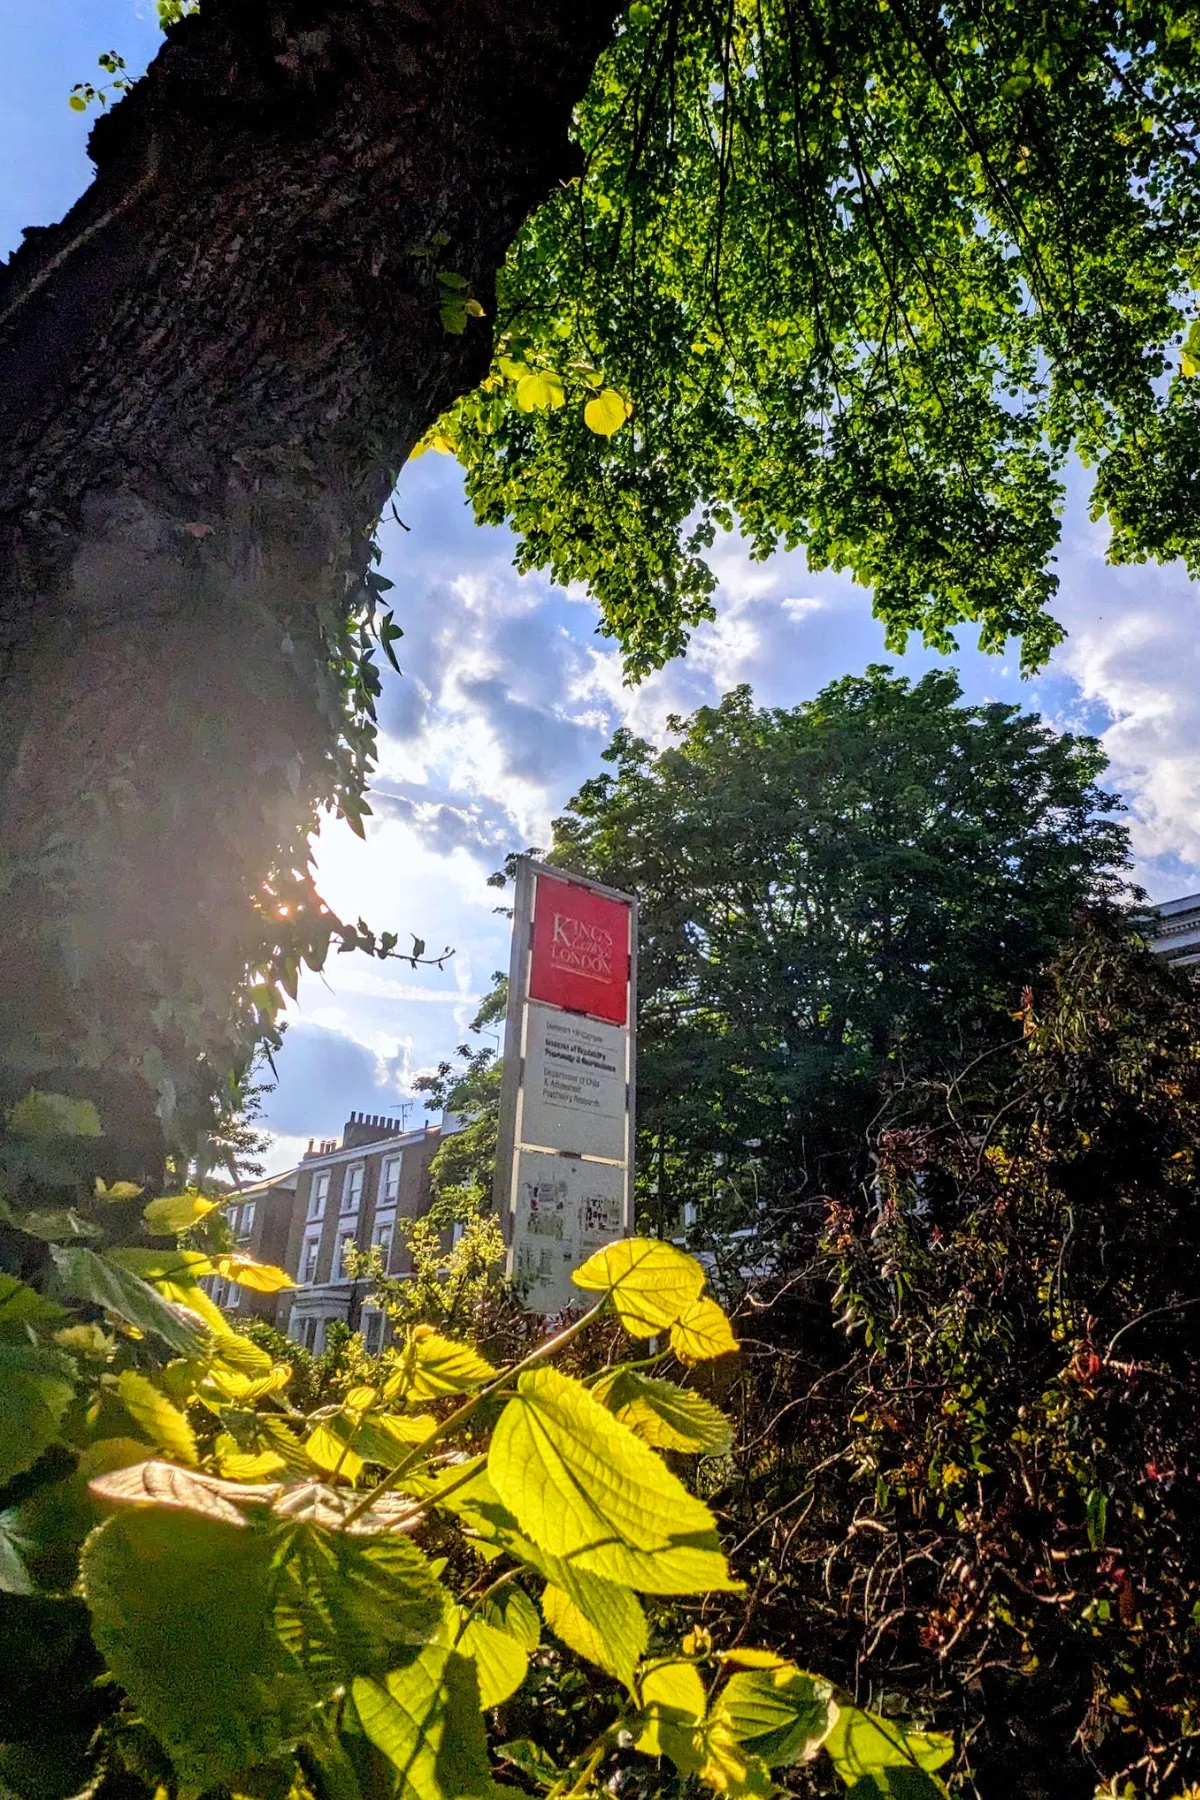 A King's College London sign surrounded by greenery on a sunny day.